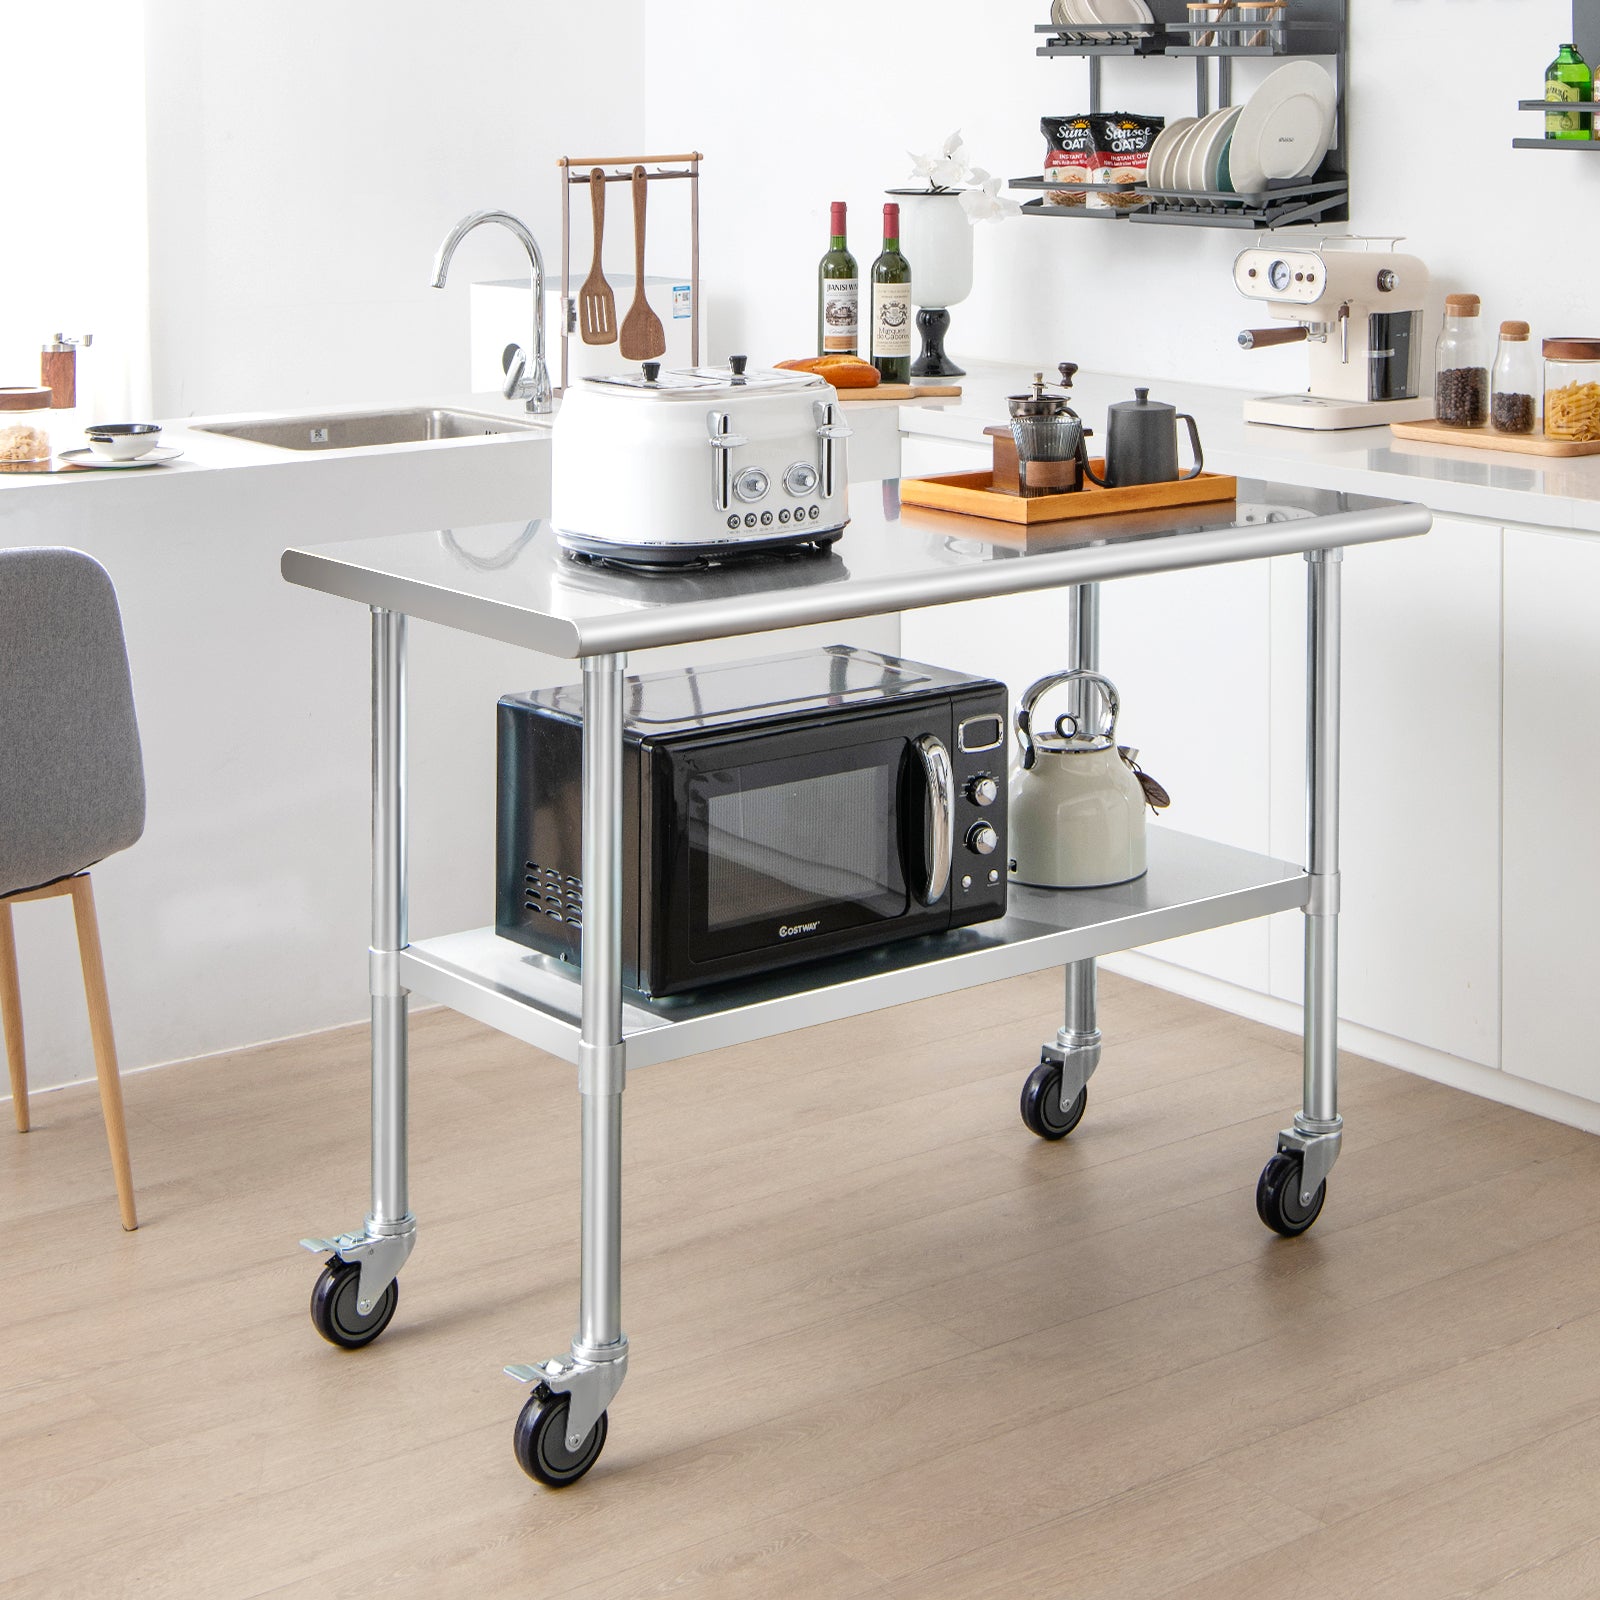 Stainless Steel Catering Table with Wheels and Adjustable Undershelf